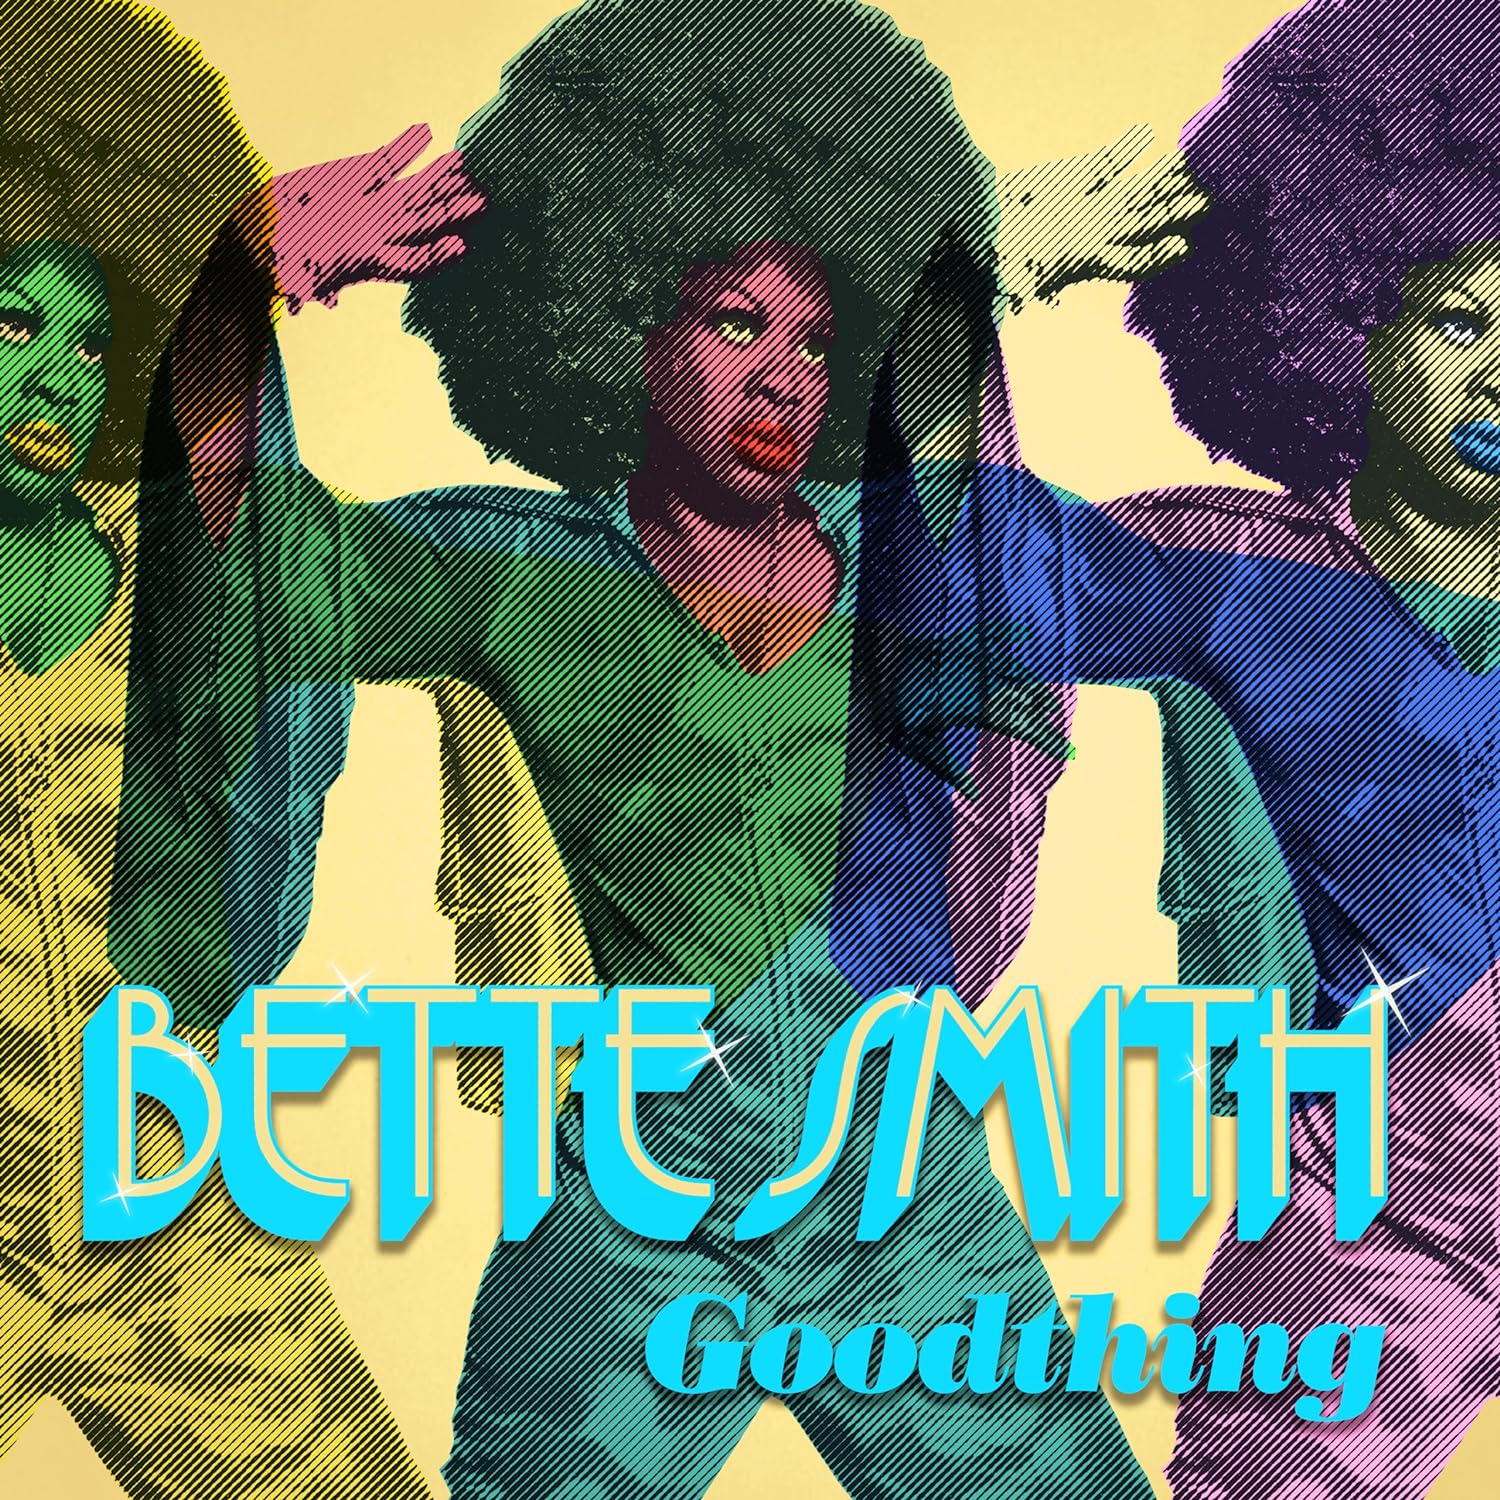 BETTE SMITH - Goodthing - CD [MAY 3]